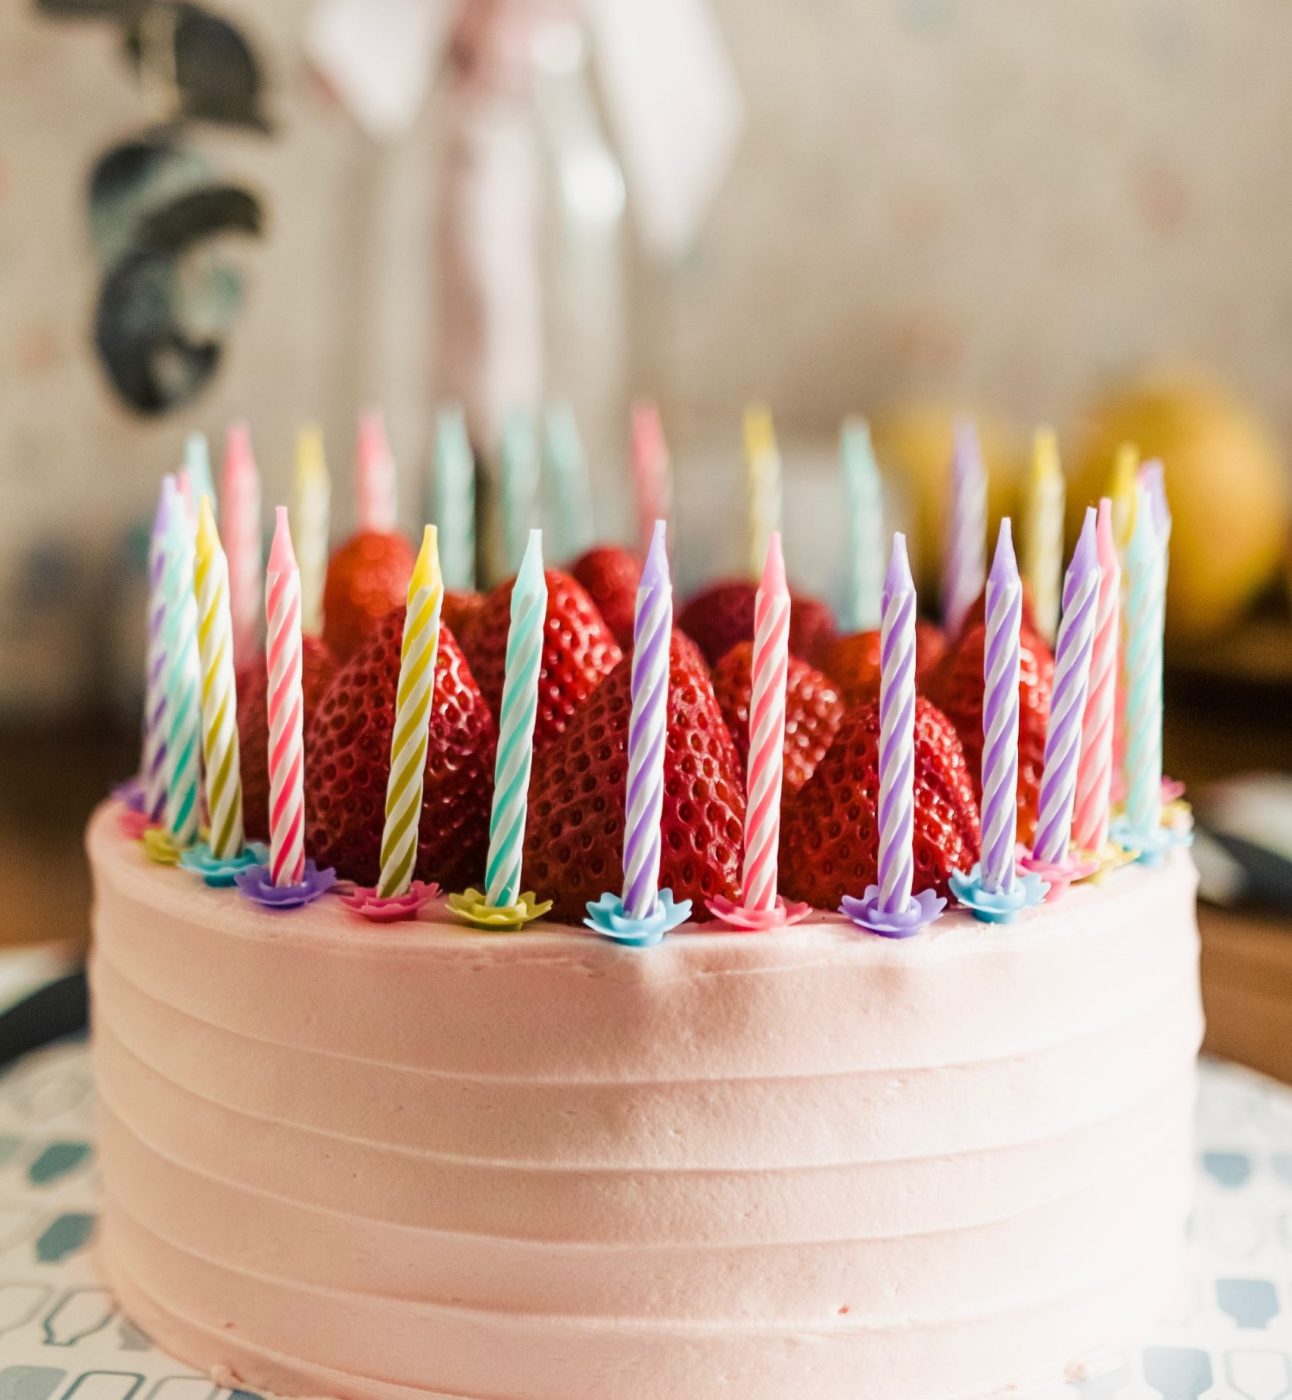 Pink birthday cake with strawberries and candles on top